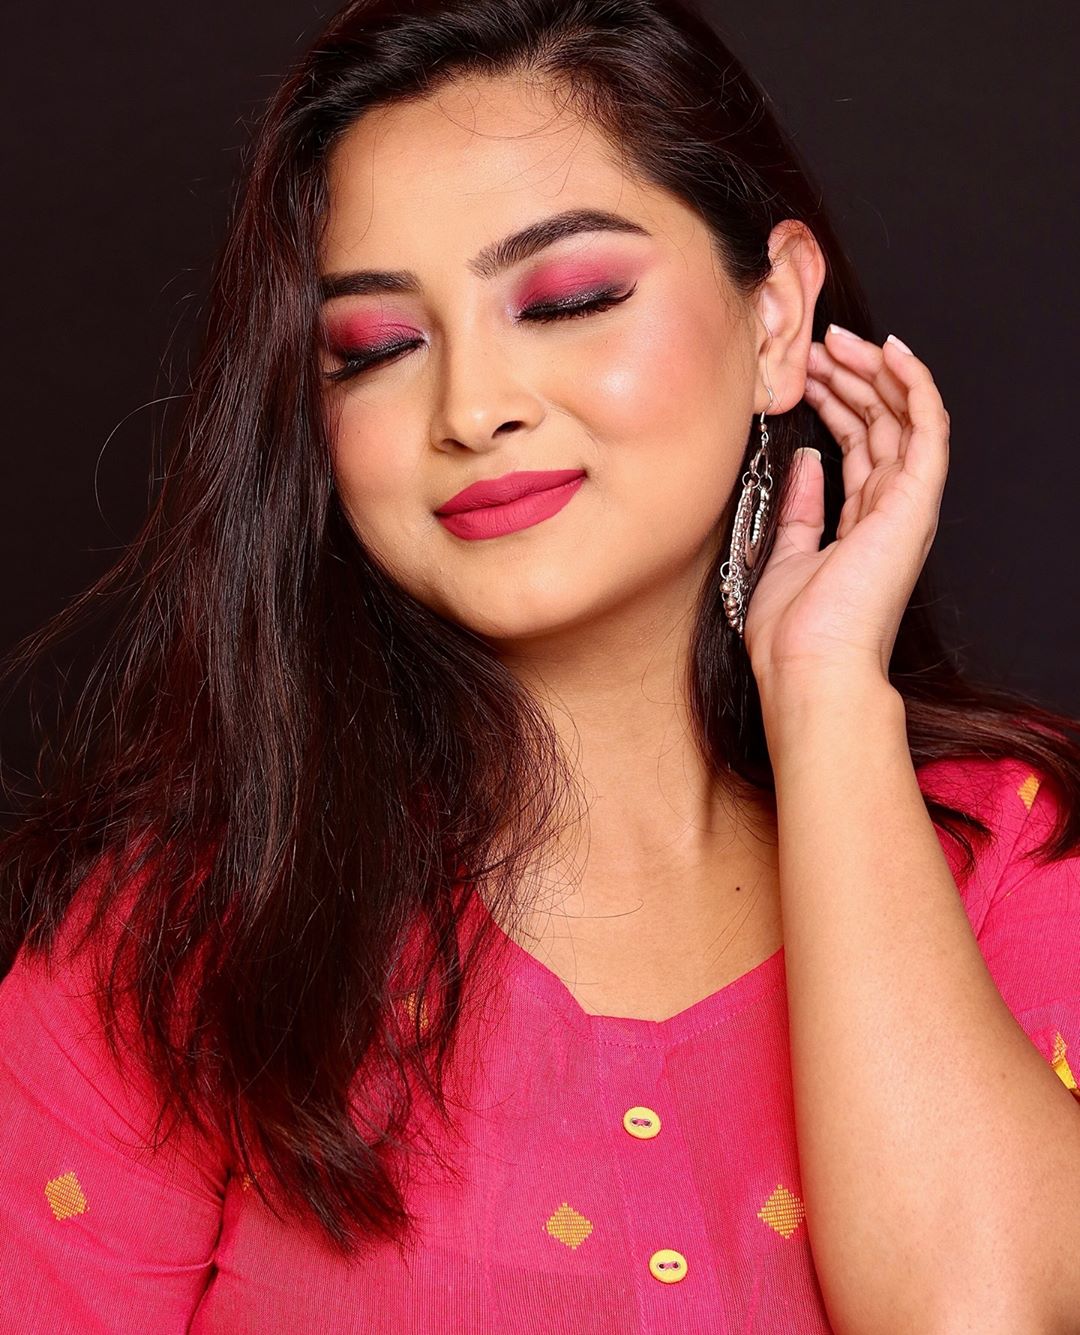 SUGAR Cosmetics - Painting the town pink! 💖⁠
In frame: @ragini_pradhan99⁠

🚨Gentle reminder to participate in our month-long CONTEST🚨
Rules:
1. Upload a picture of you wearing pink makeup (Example: pi...